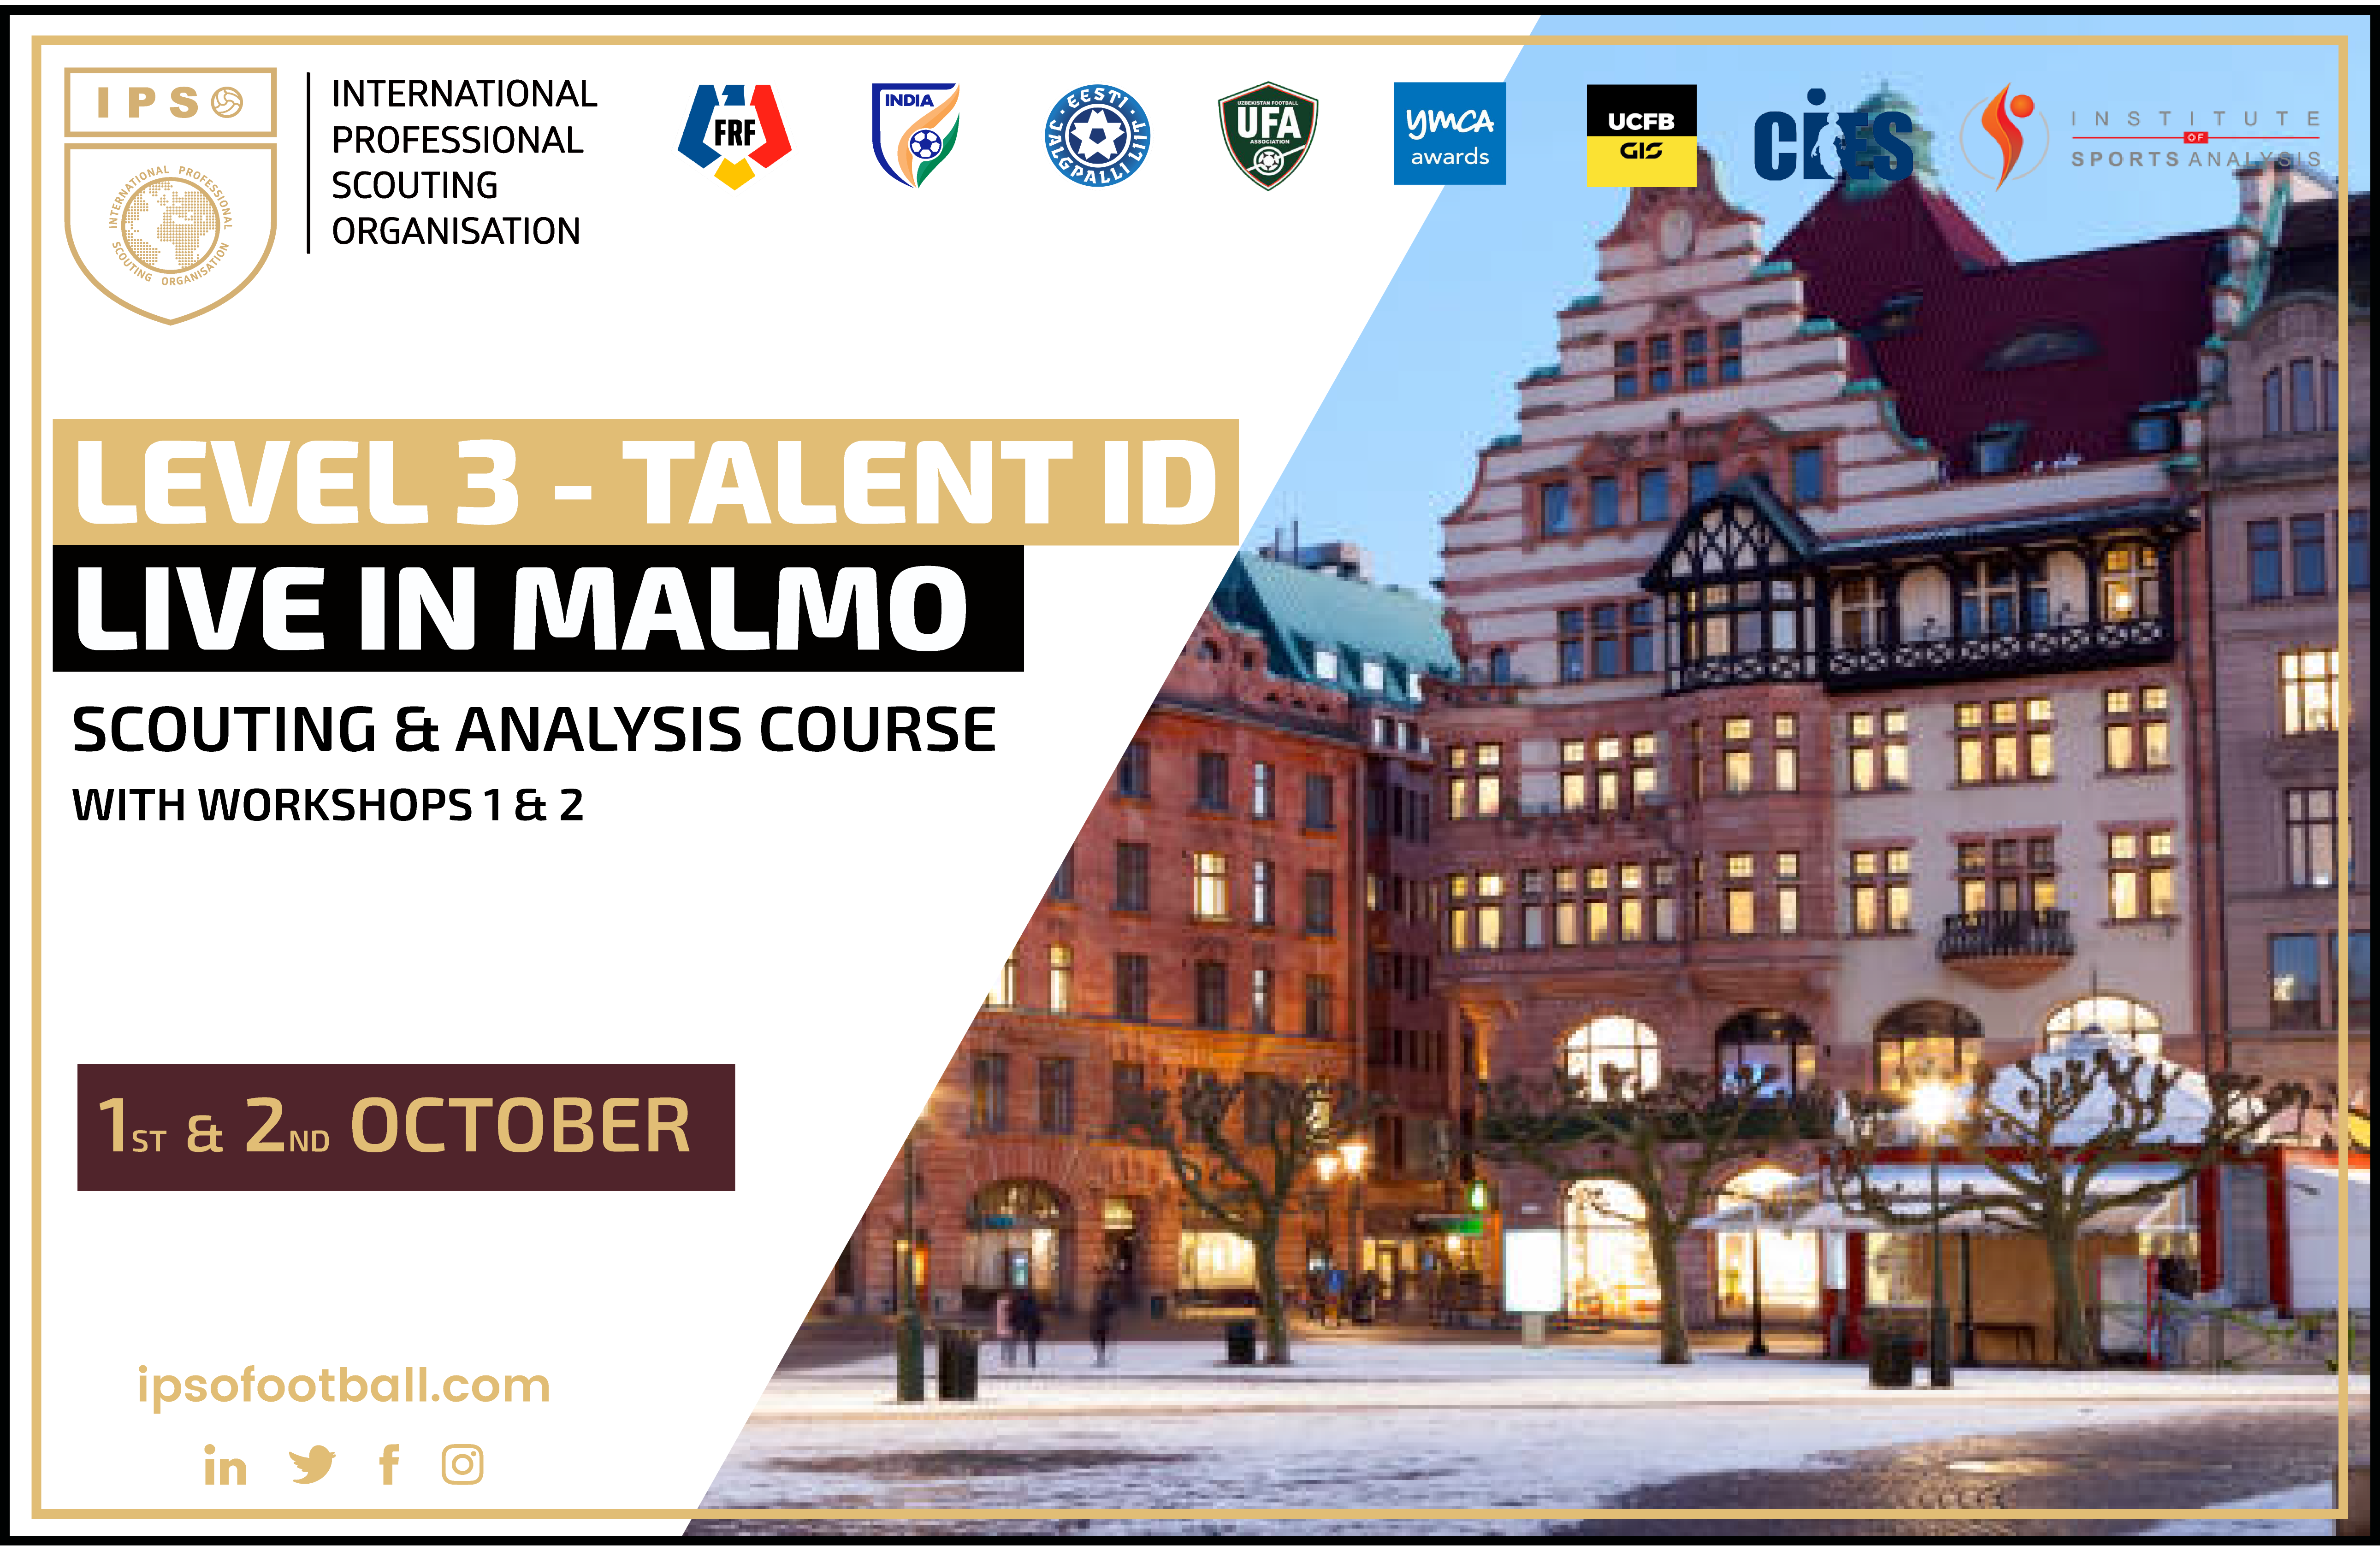 IPSO BACK IN MALMO SWEDEN